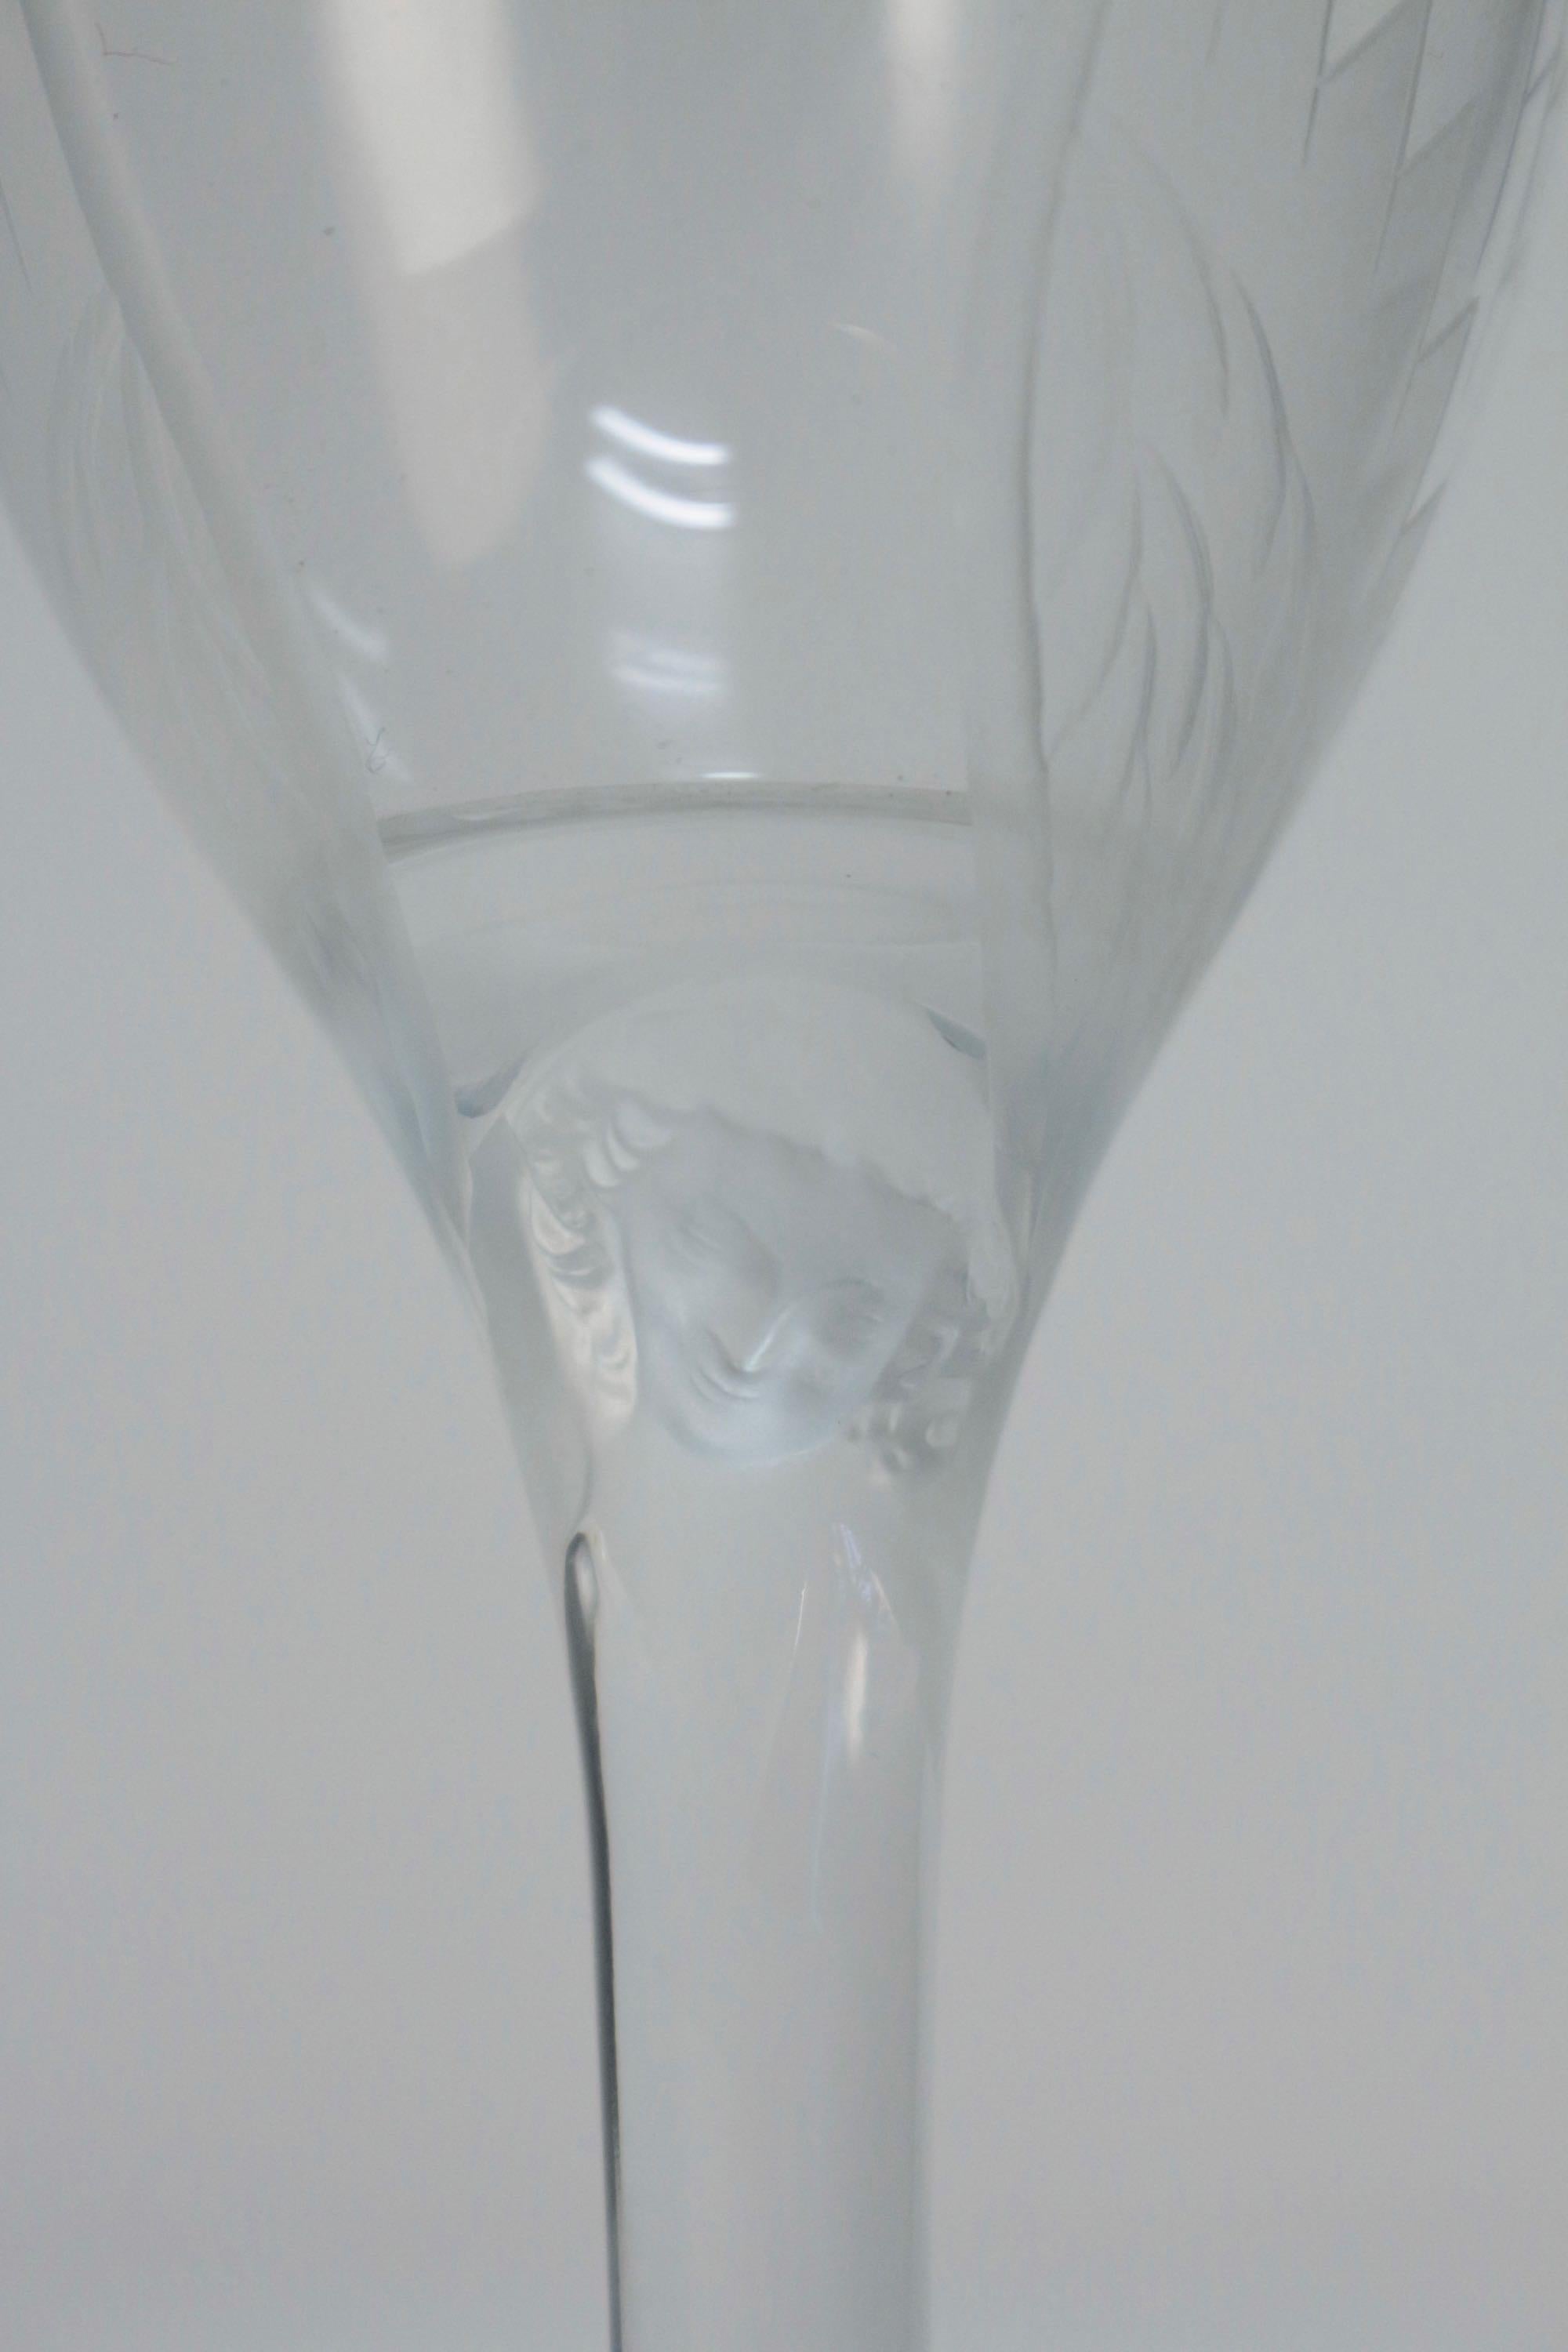 coupe champagne lalique ange